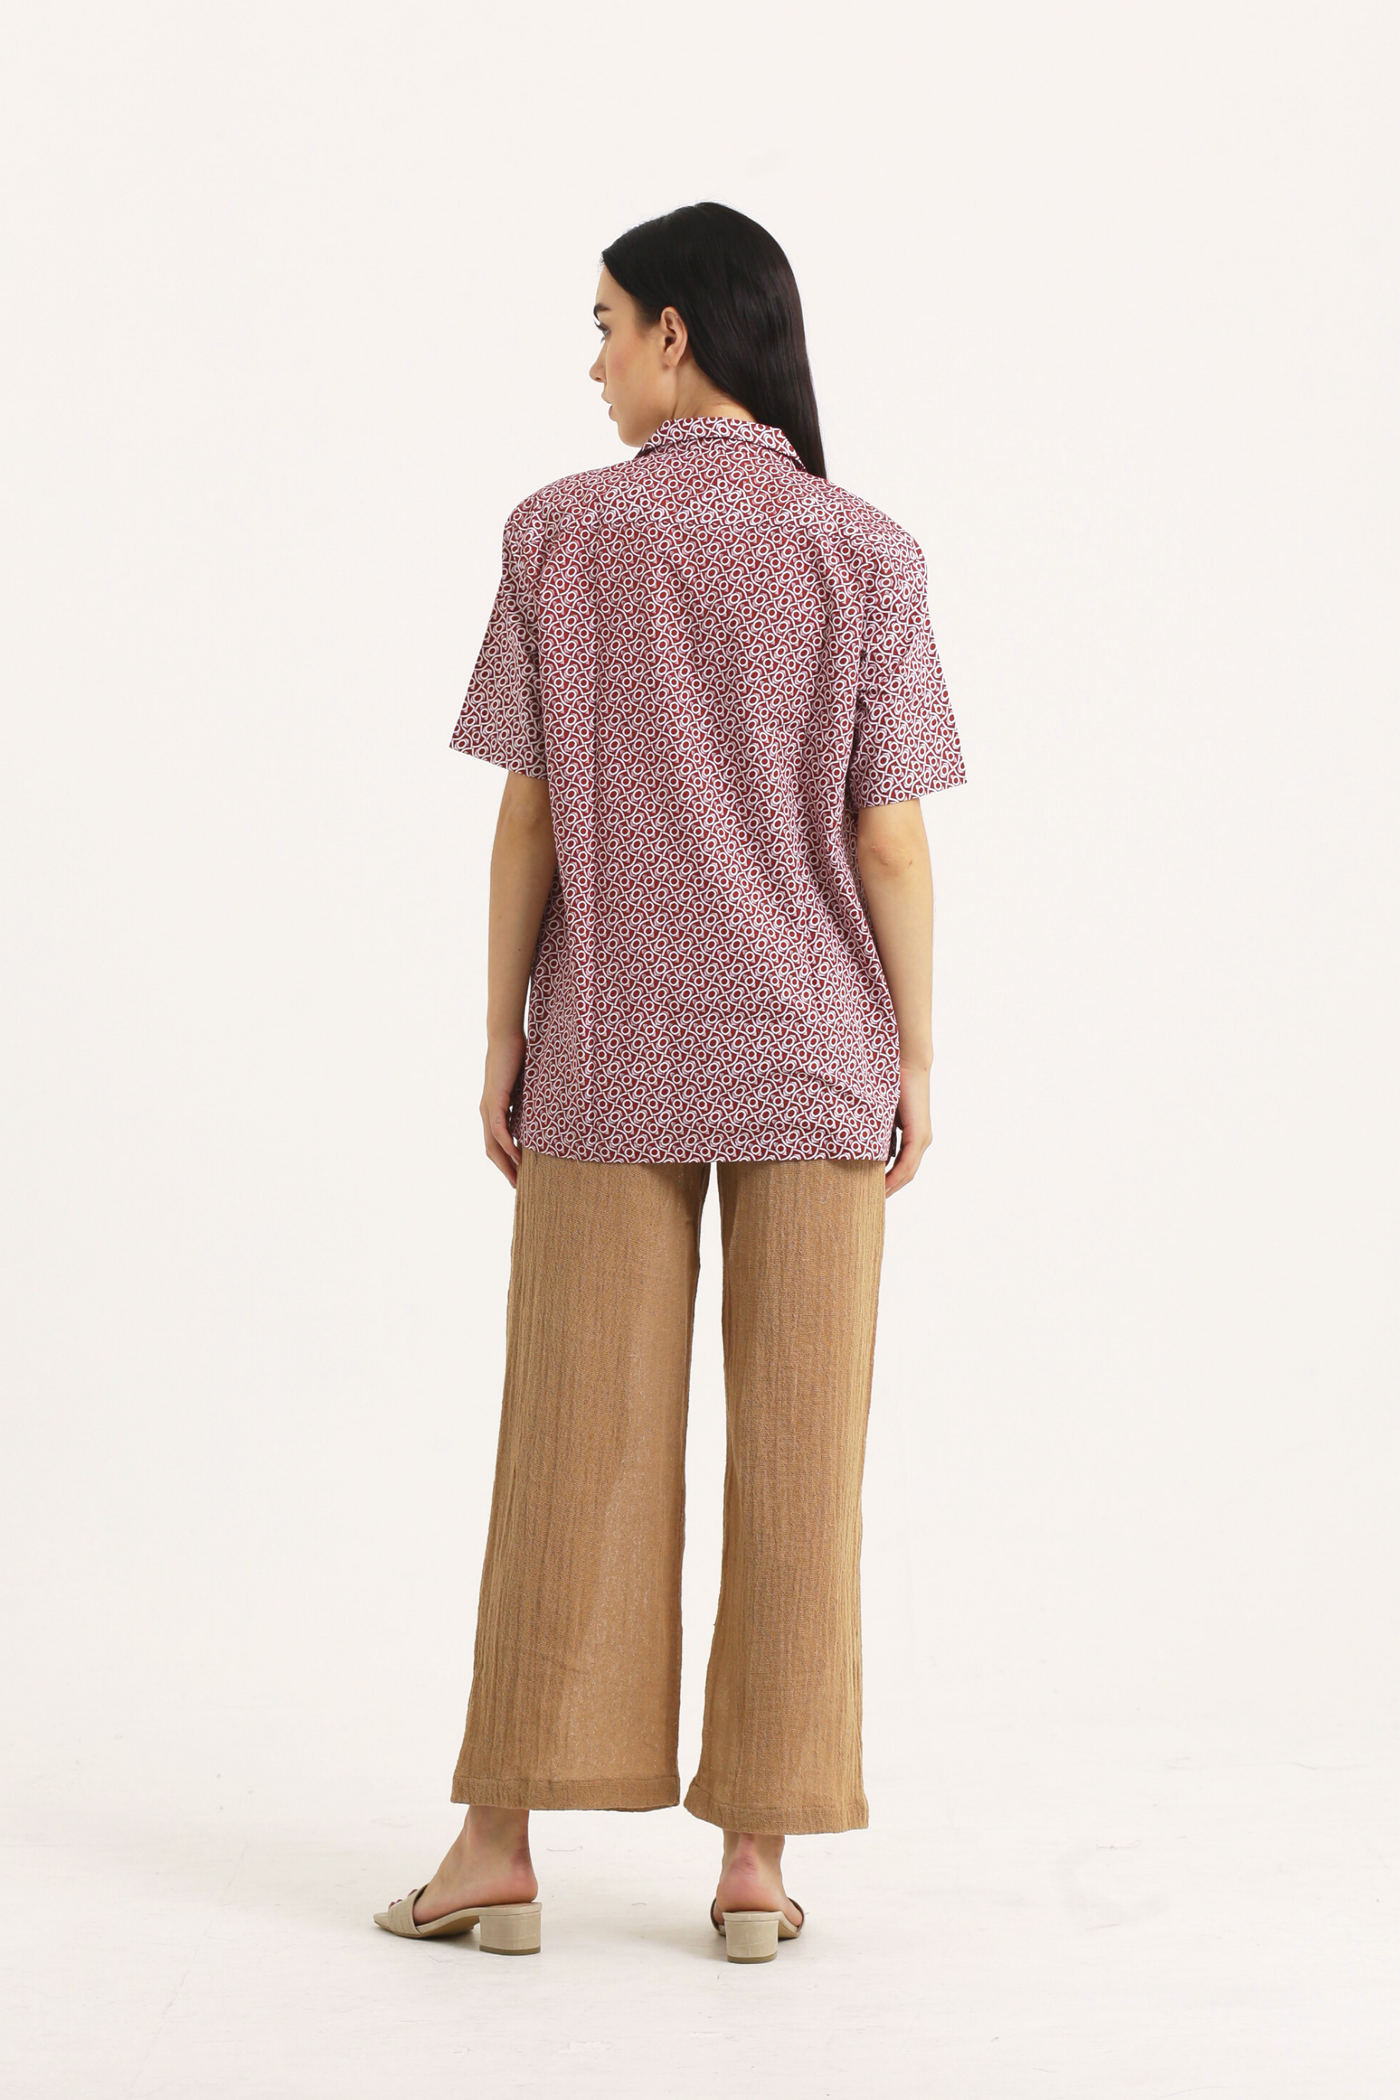 Stain Ringo Shirt in Rex, available on ZERRIN with free Singapore shipping